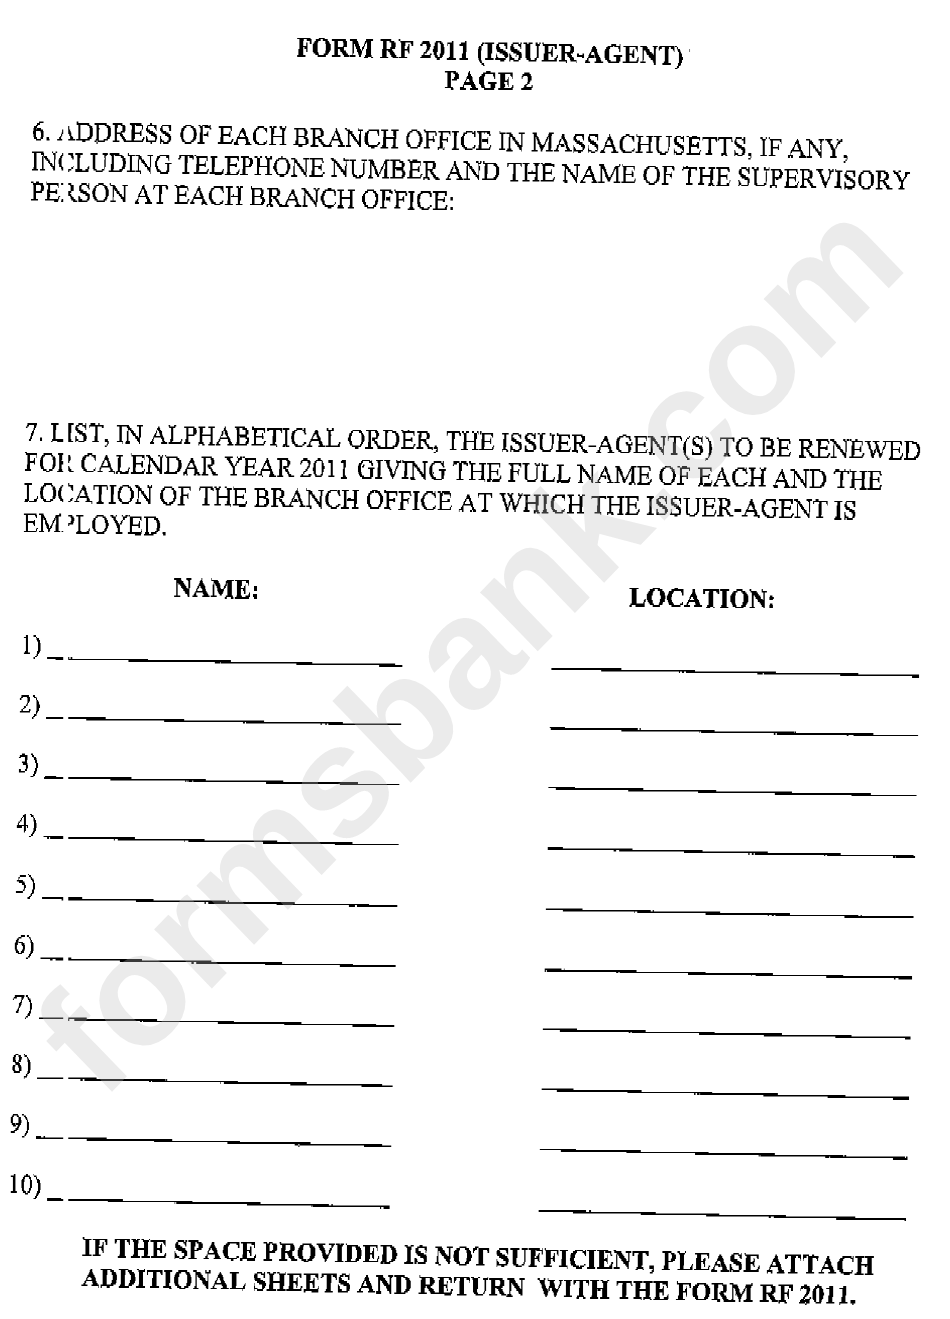 Form Rf 2011 - Application For 2011 Renewal Of Issuer-Agent Registration